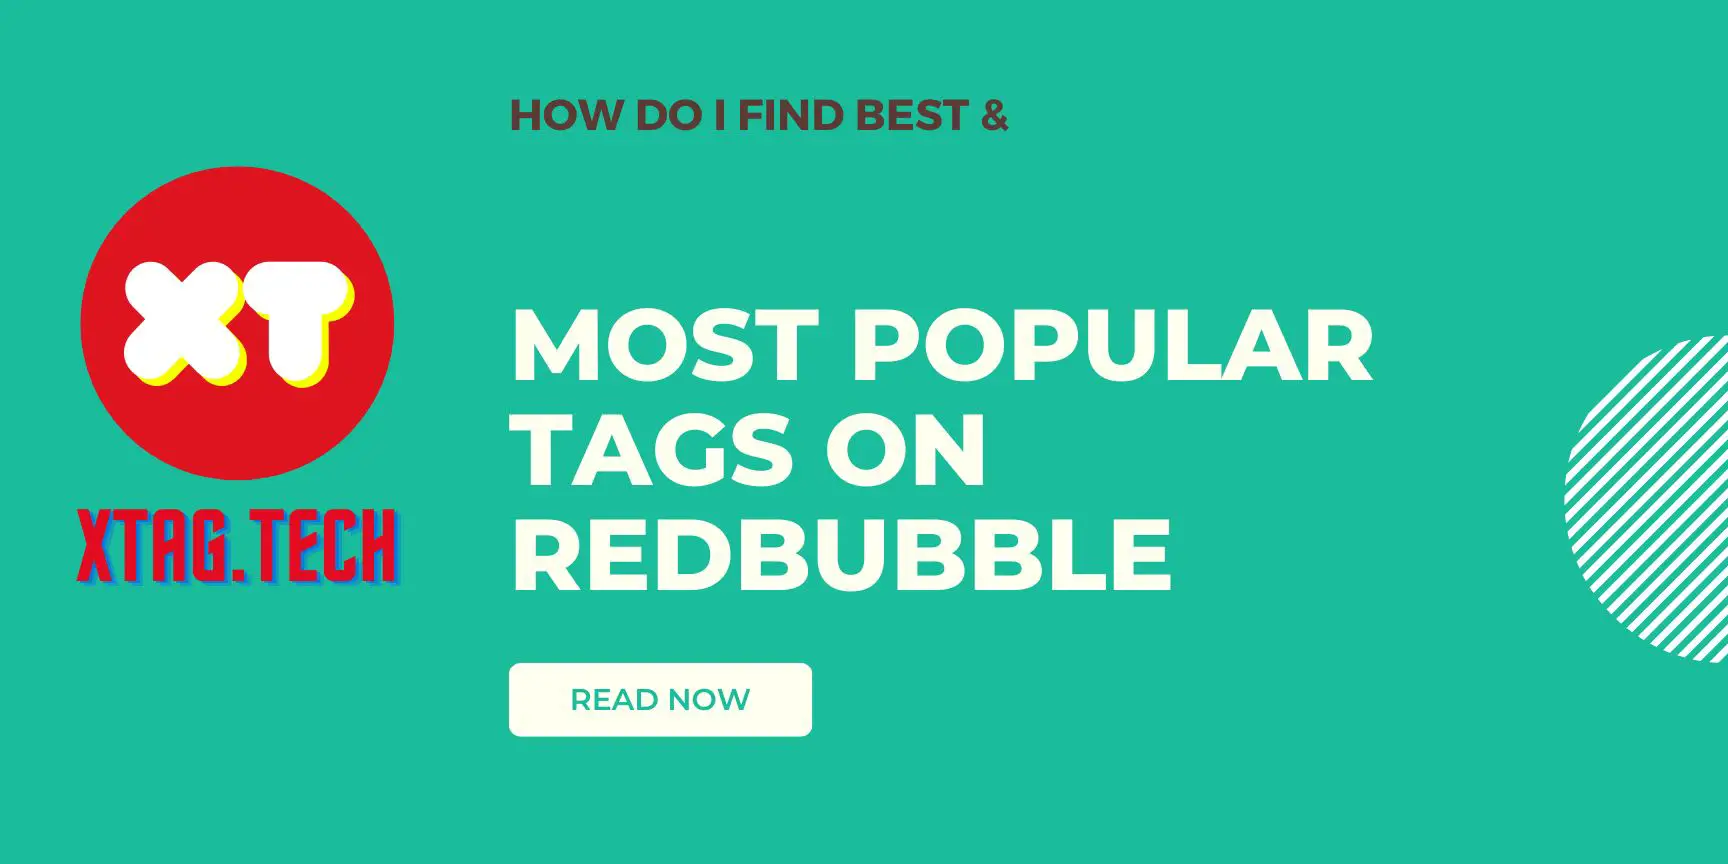 What are the most popular tags on Redbubble 2022?